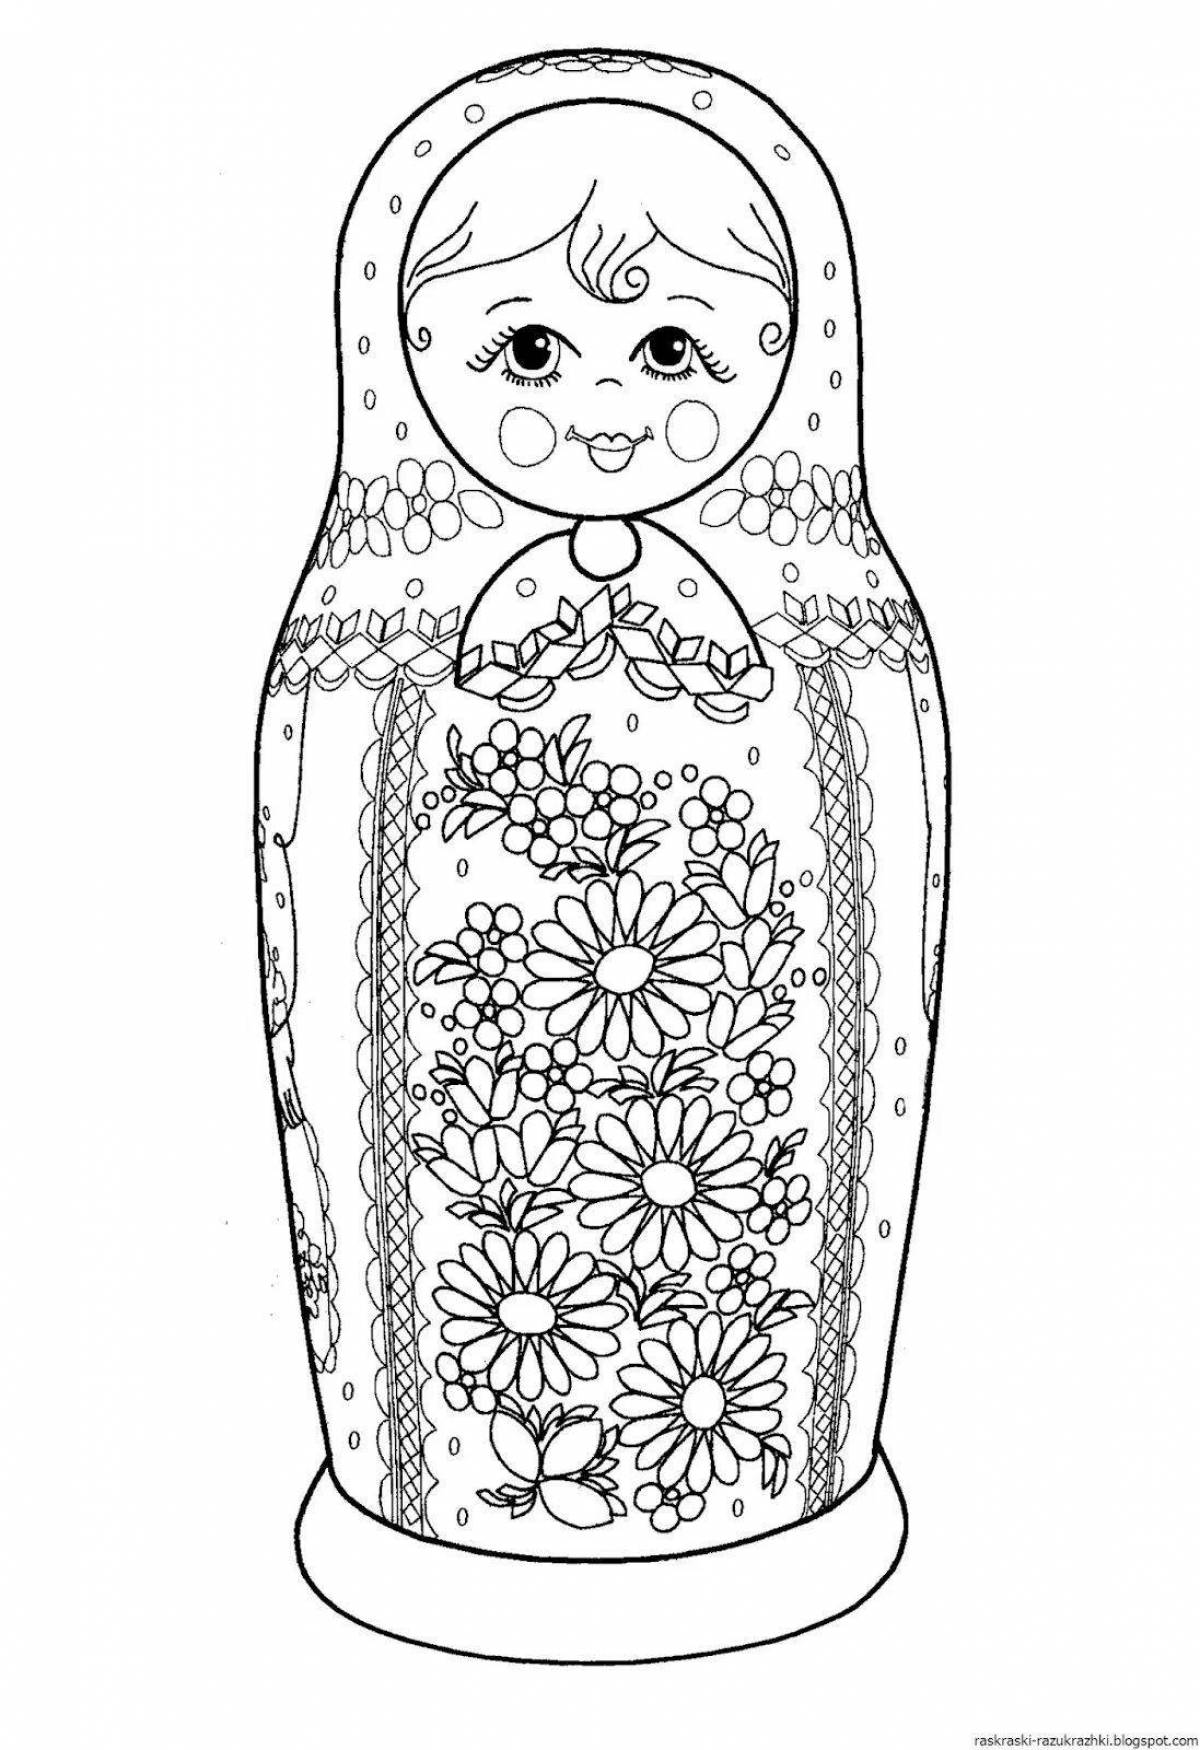 Adorable matryoshka coloring book for toddlers